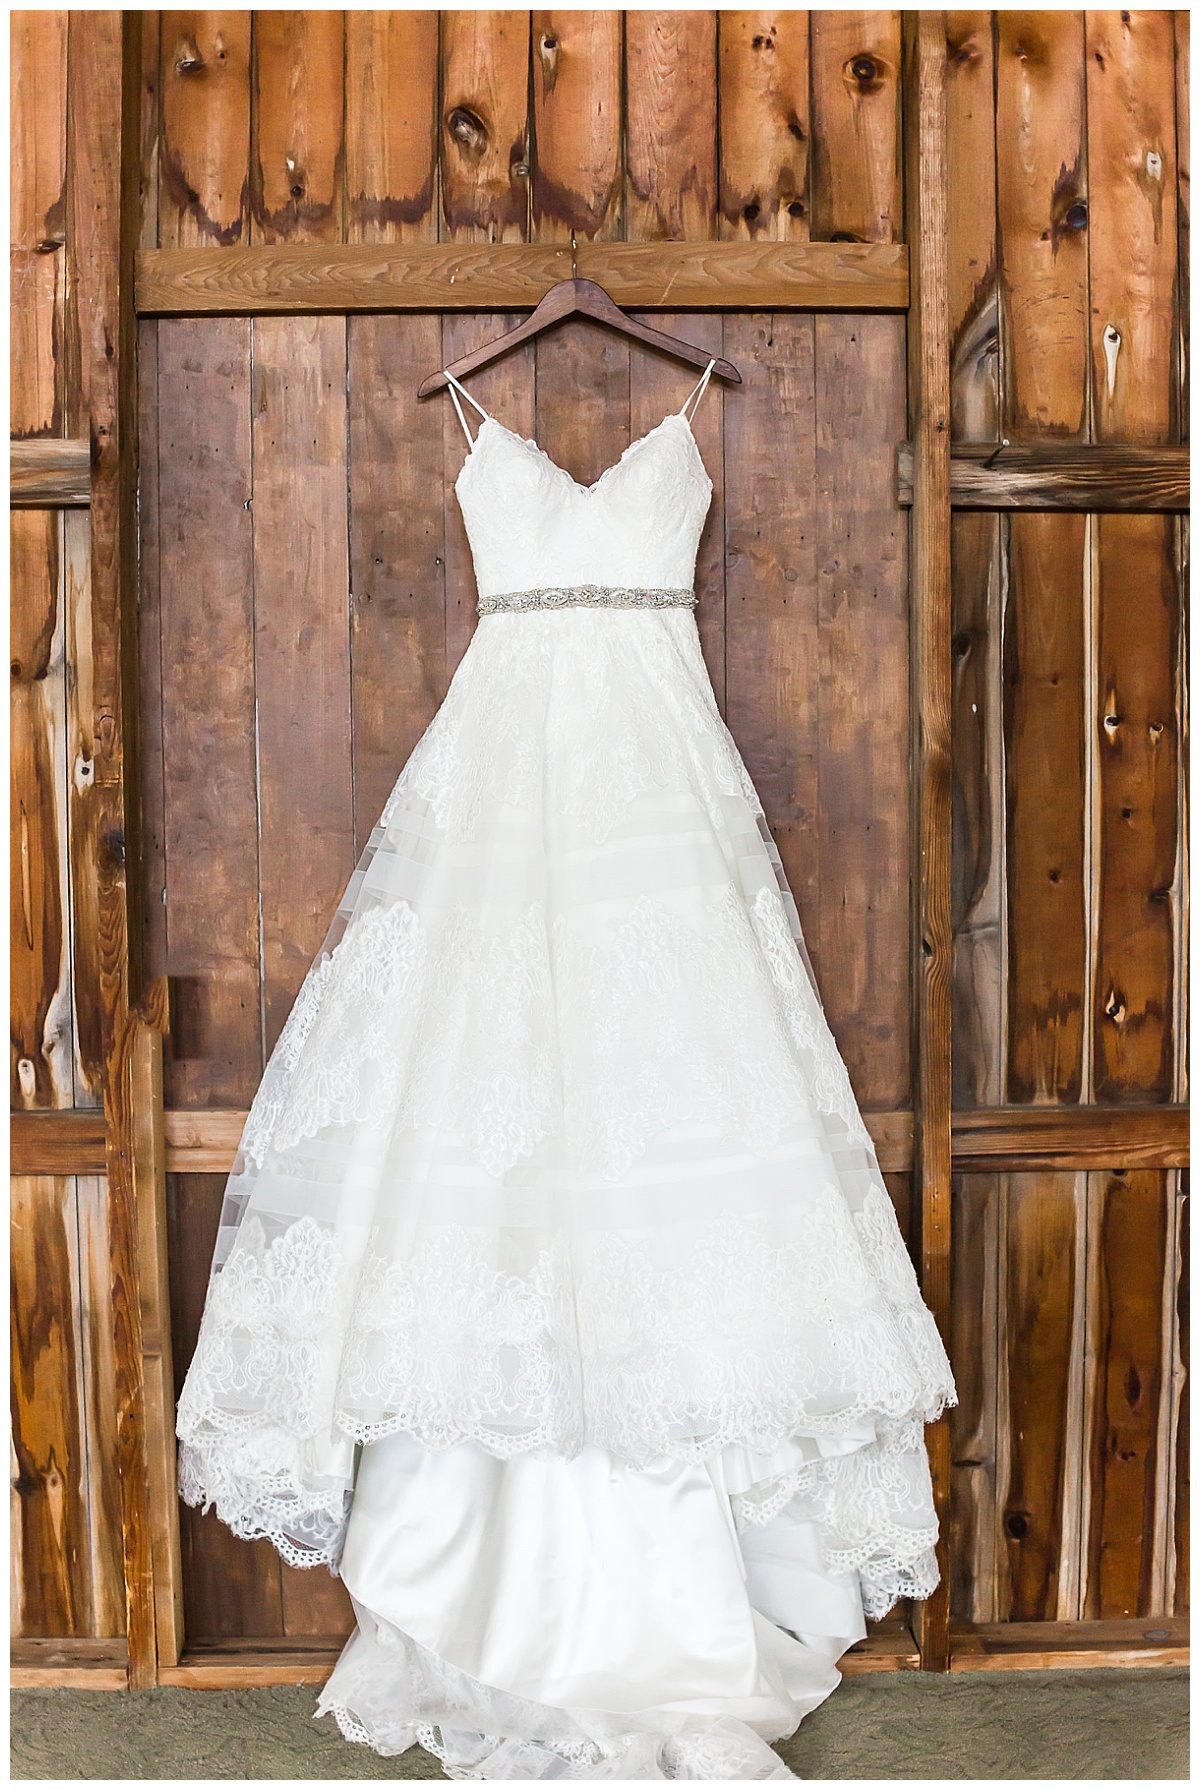 white ball gown style wedding dress hung in front of wooden background